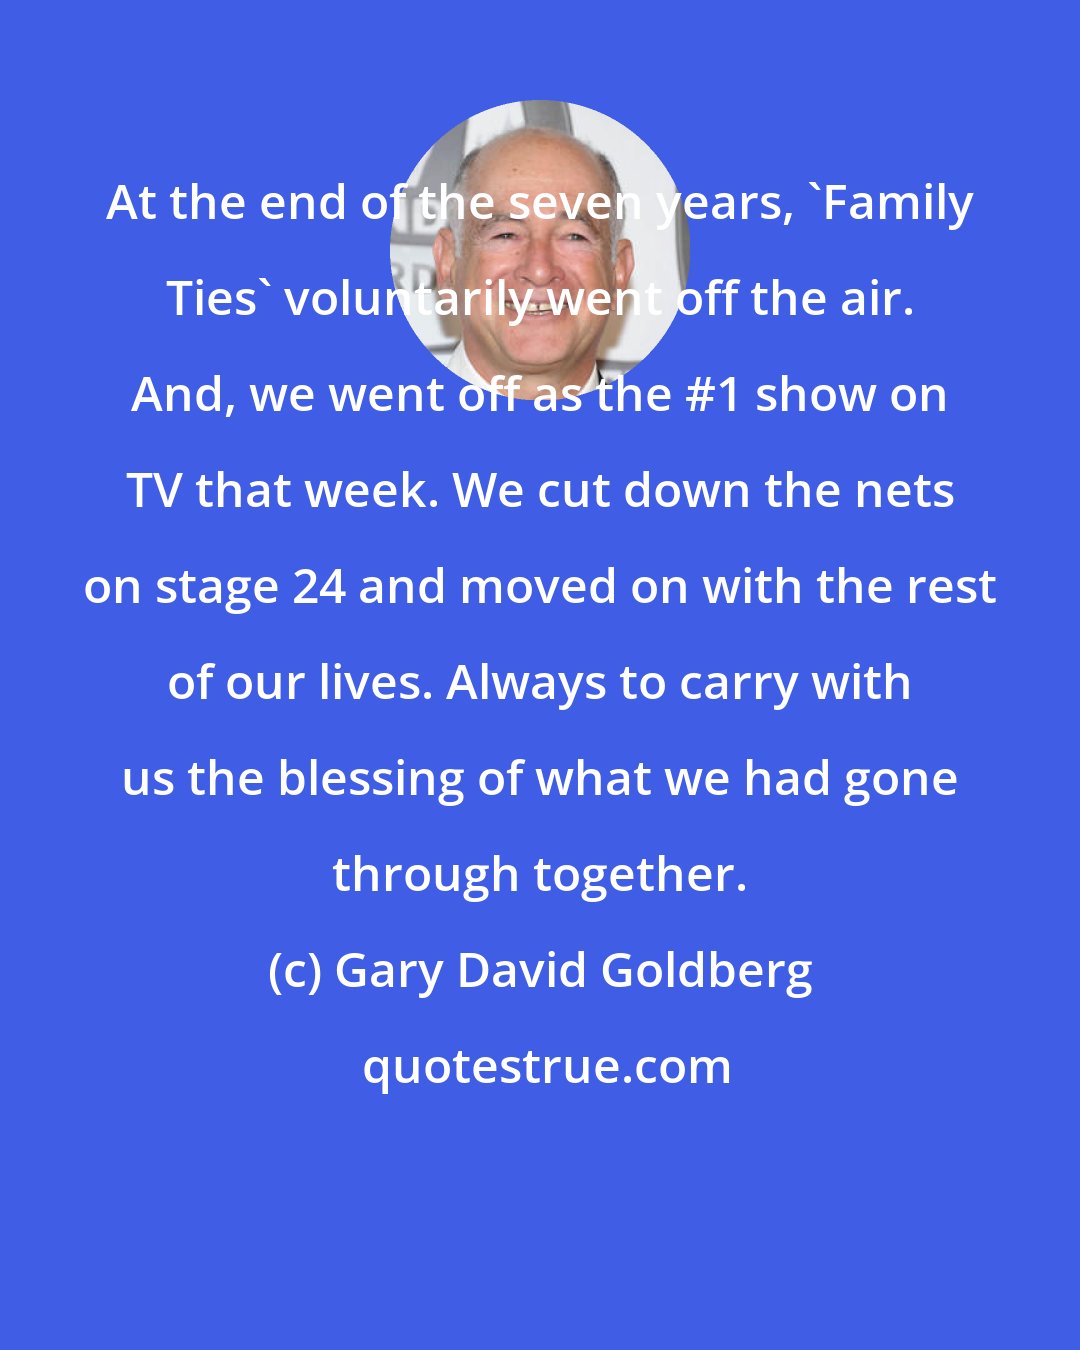 Gary David Goldberg: At the end of the seven years, 'Family Ties' voluntarily went off the air. And, we went off as the #1 show on TV that week. We cut down the nets on stage 24 and moved on with the rest of our lives. Always to carry with us the blessing of what we had gone through together.